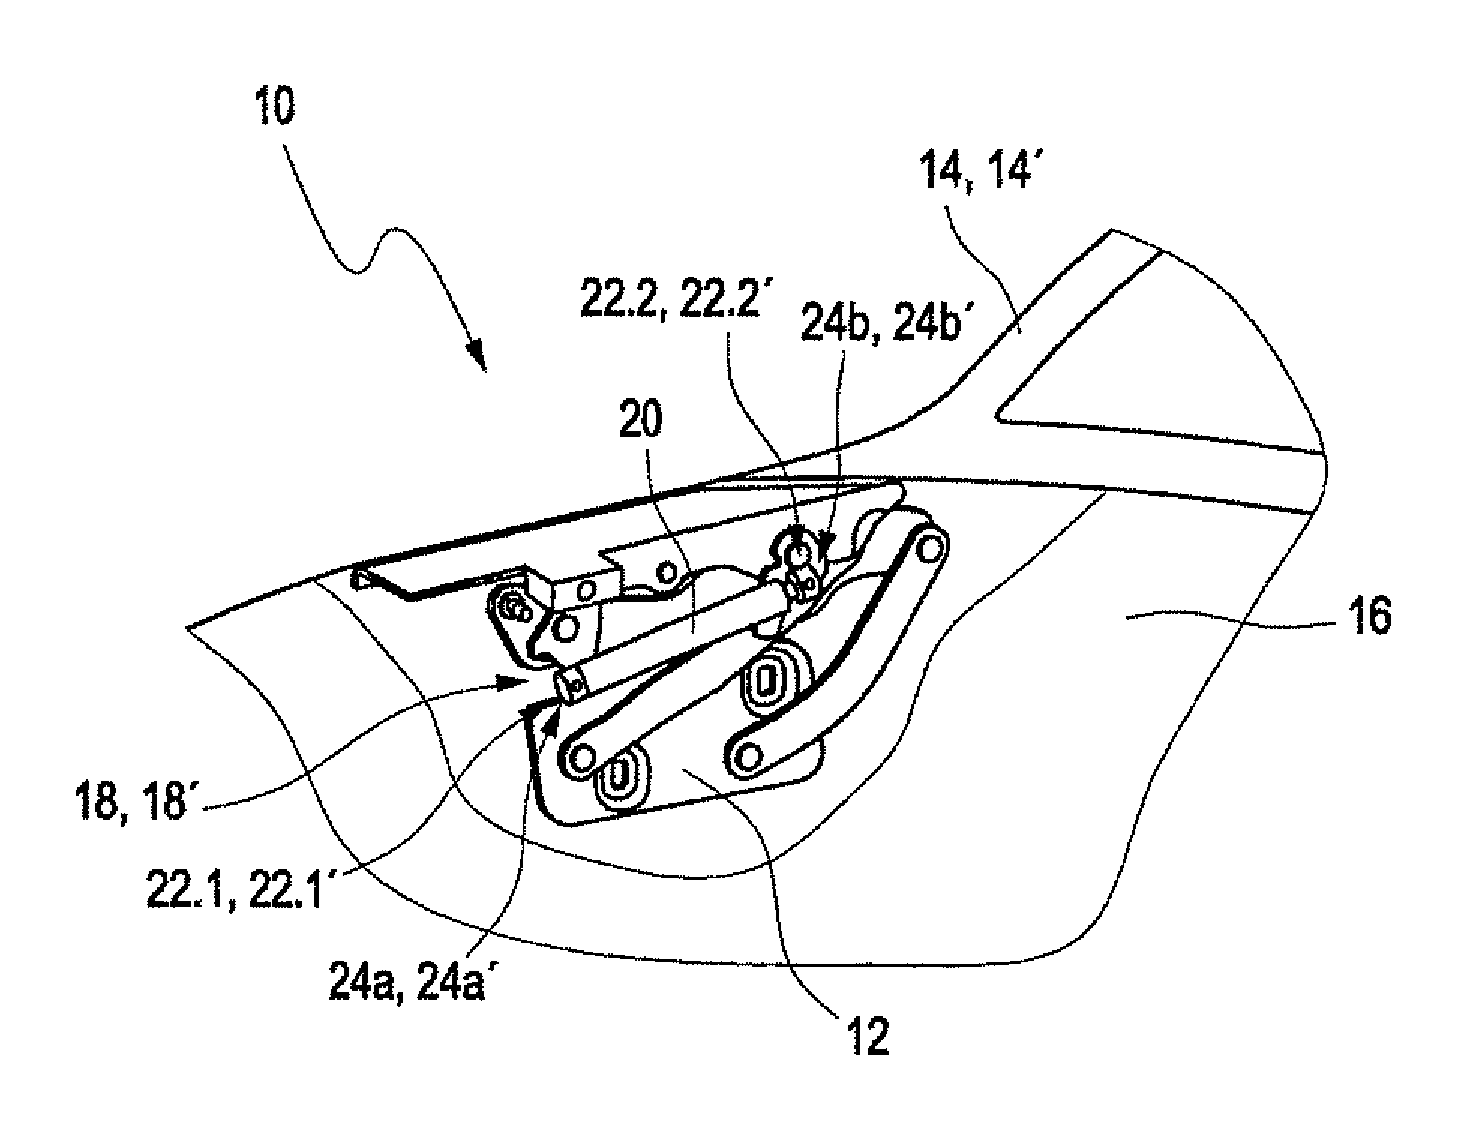 Pedestrian protection device for a motor vehicle